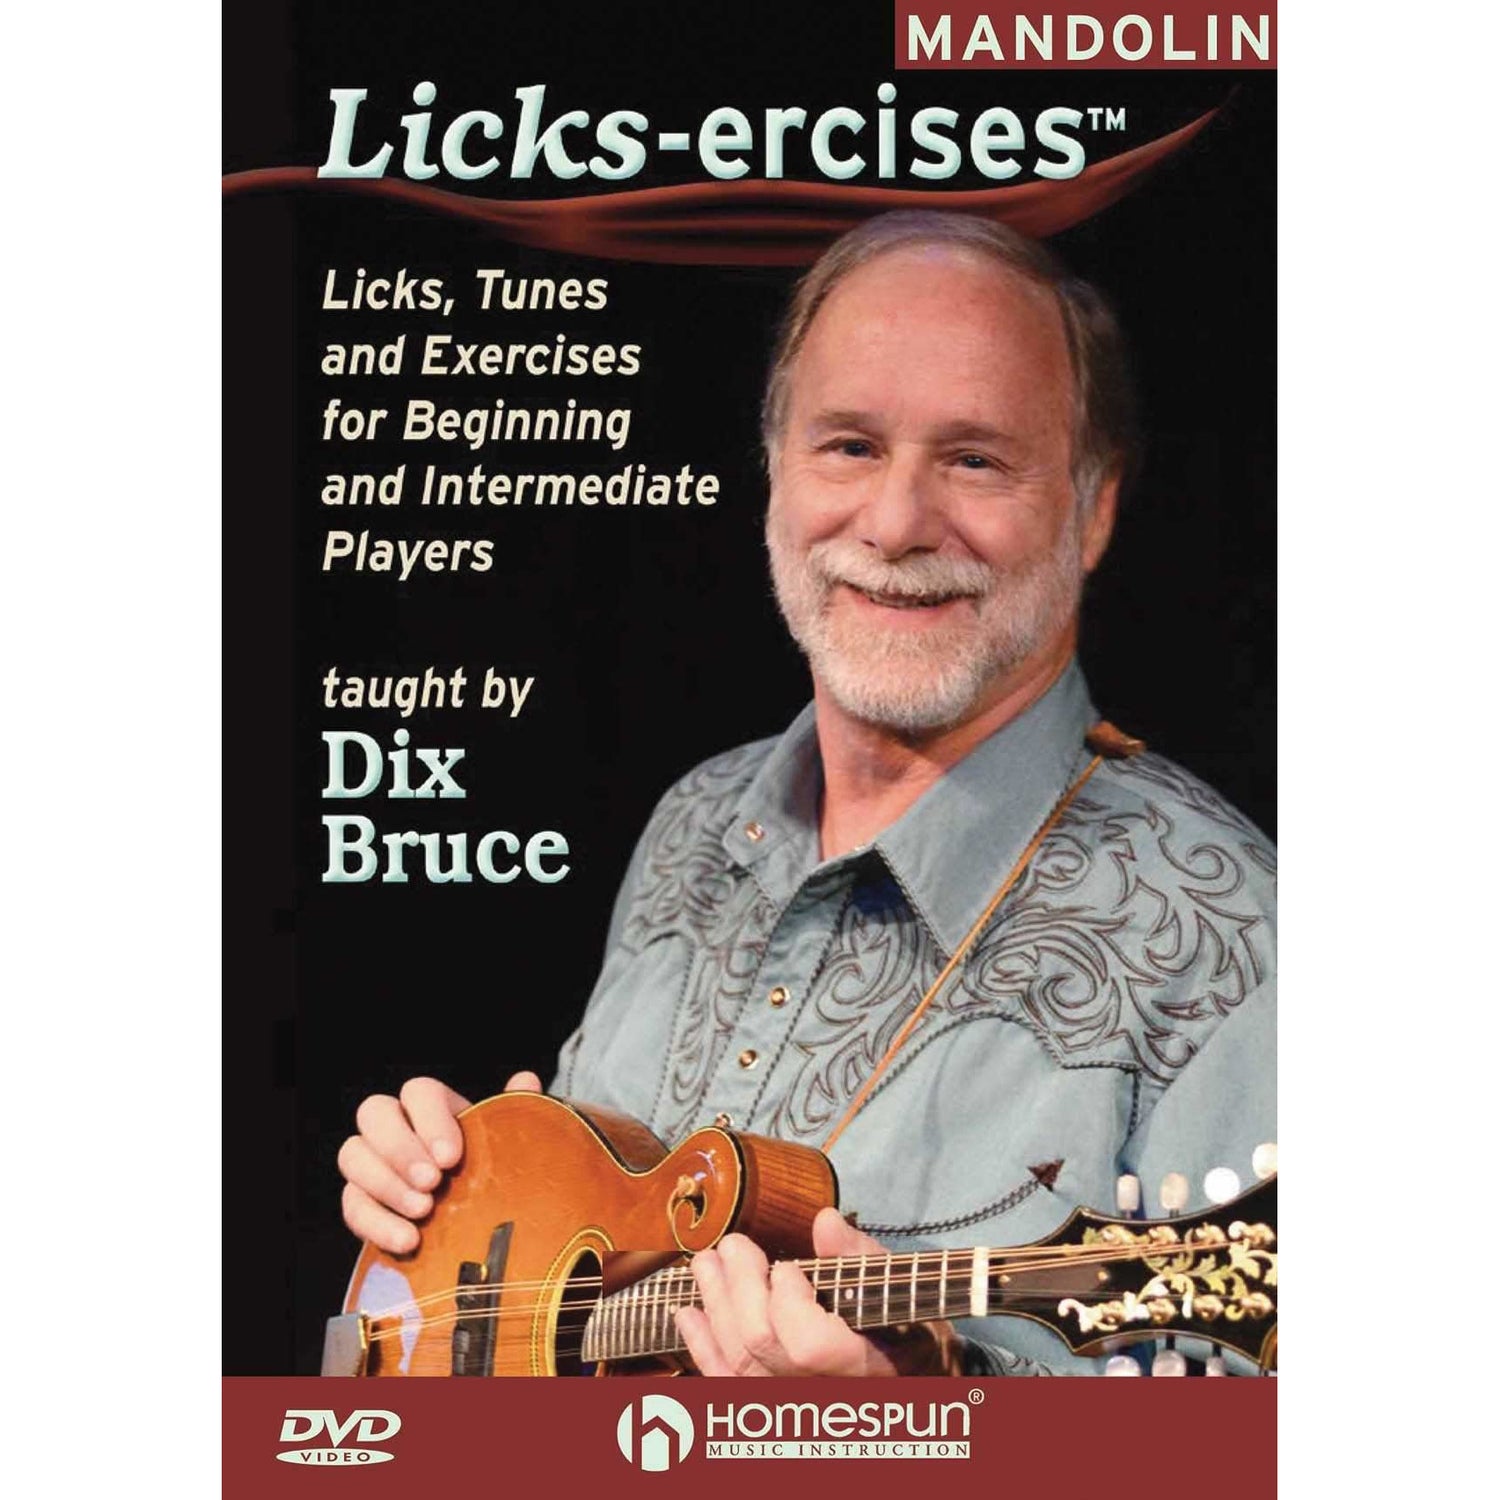 Image 1 of DVD - Mandolin Licks-Ercises - Licks, Tunes and Exercises for Beginning and Intermediate Players - SKU# 300-DVD478 : Product Type Media : Elderly Instruments